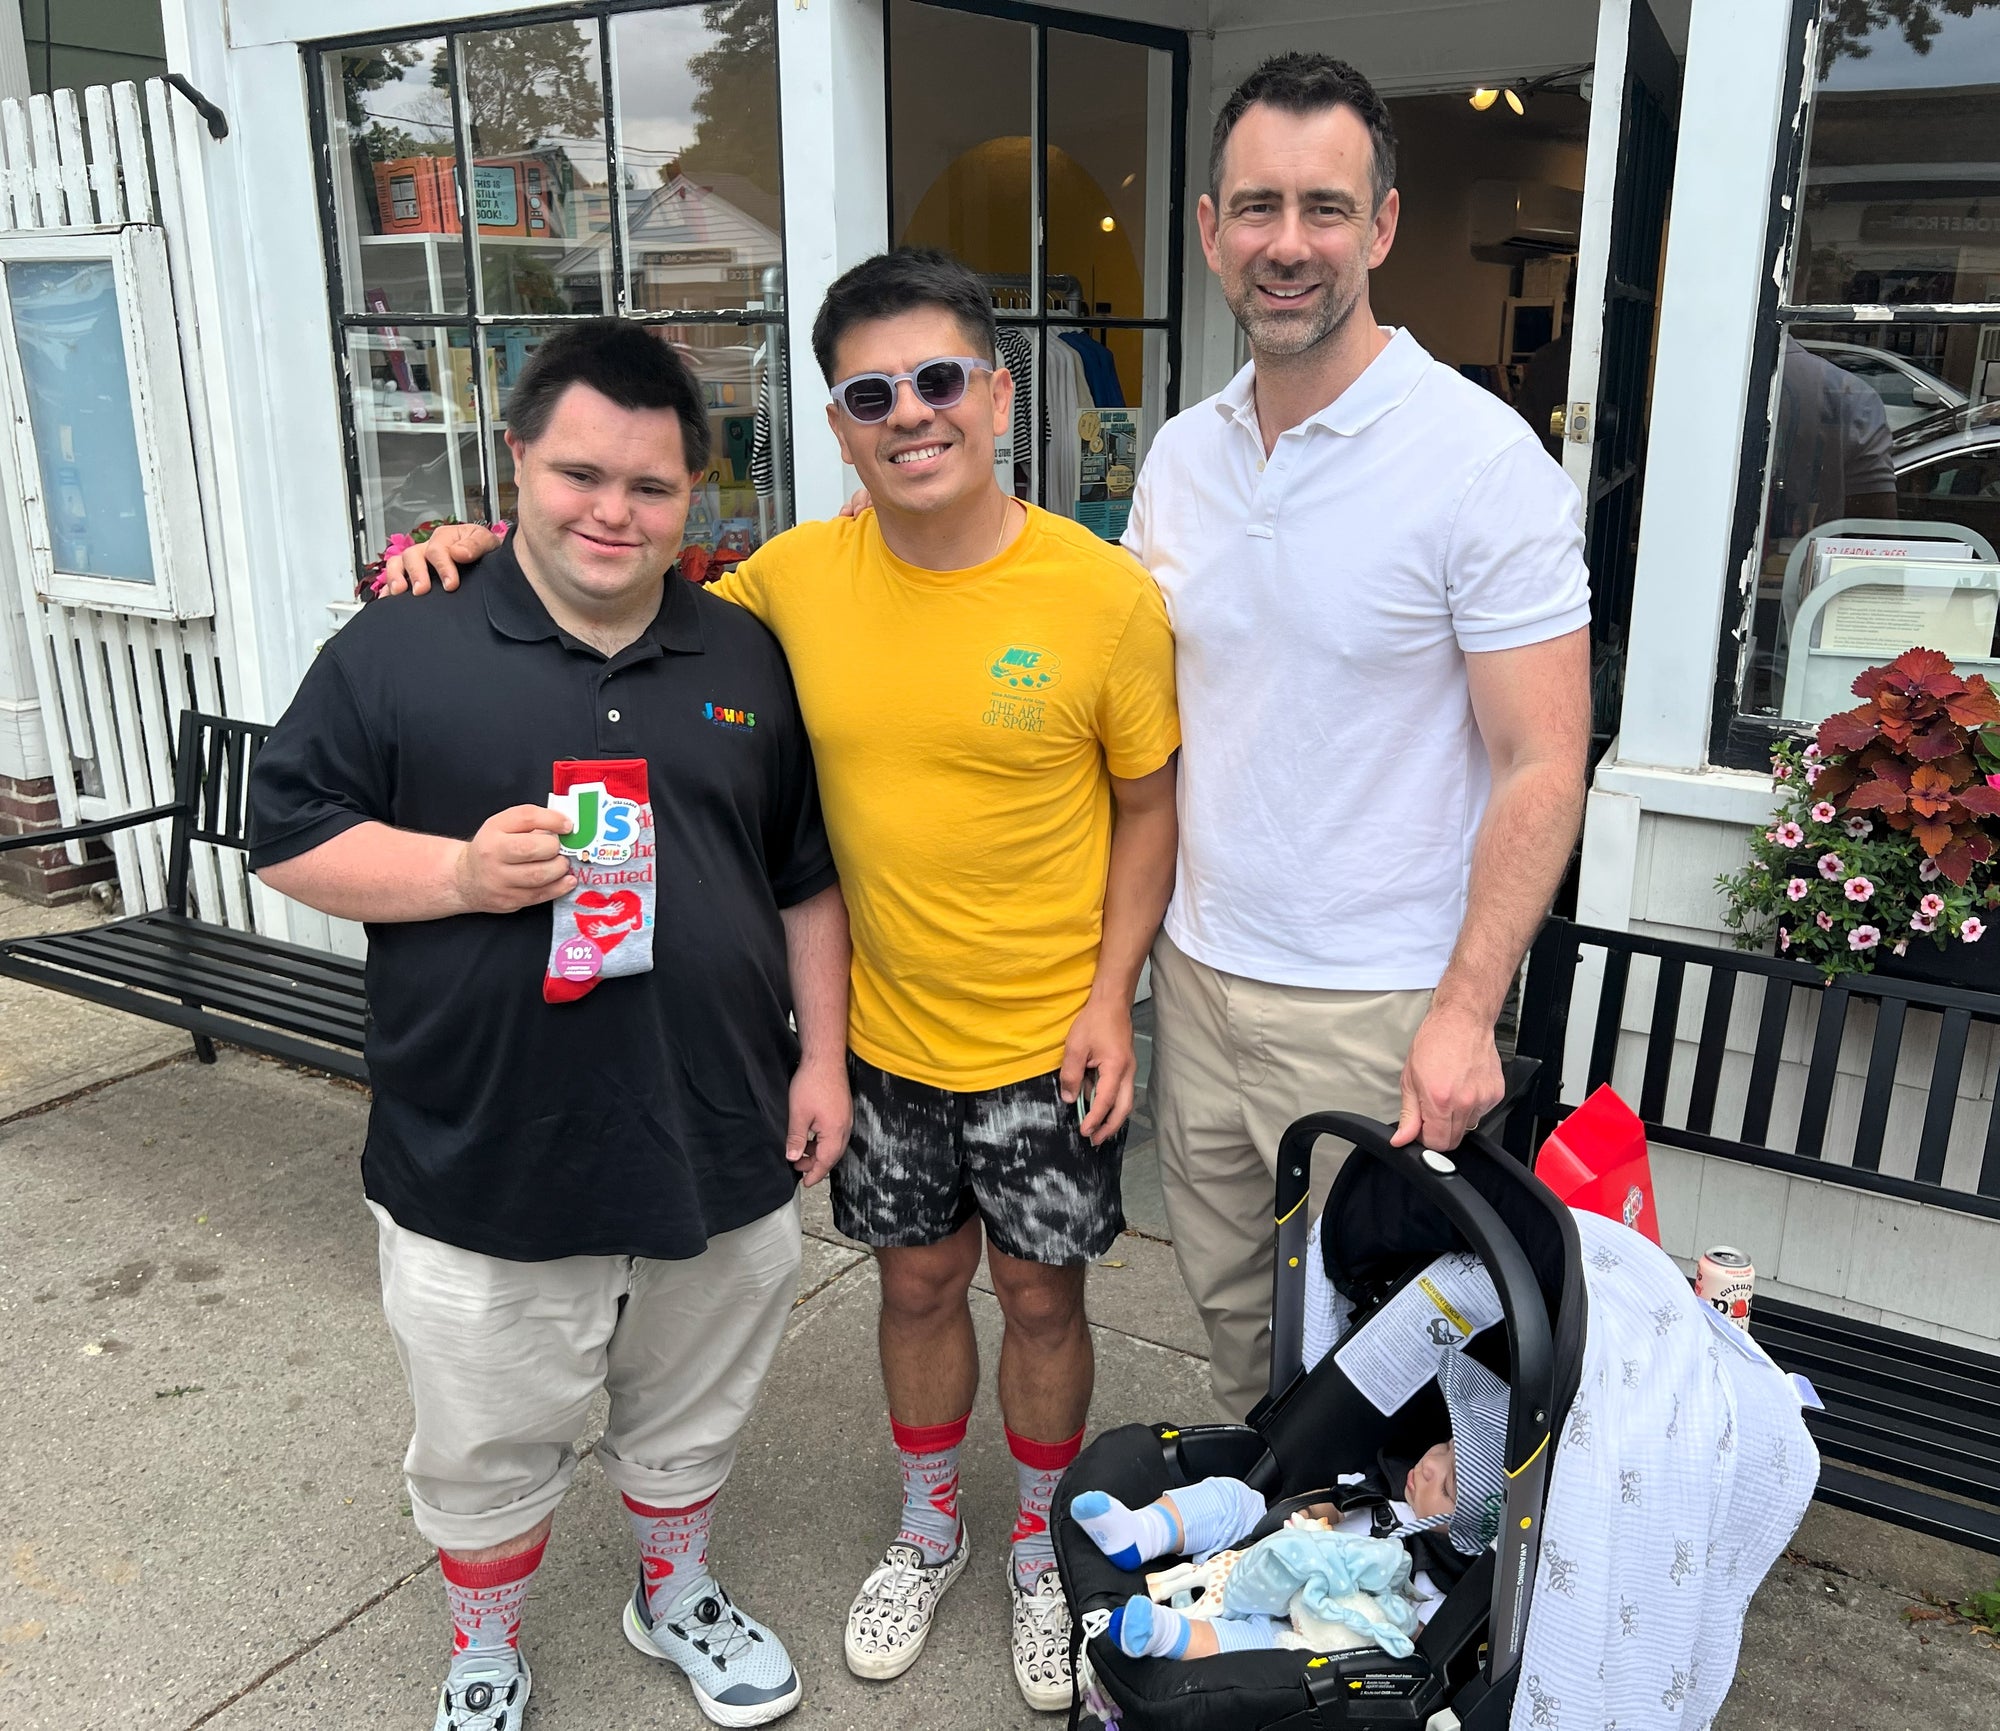 John Delivers Adoption Awareness Socks to a Family with a Newly Adopted Baby